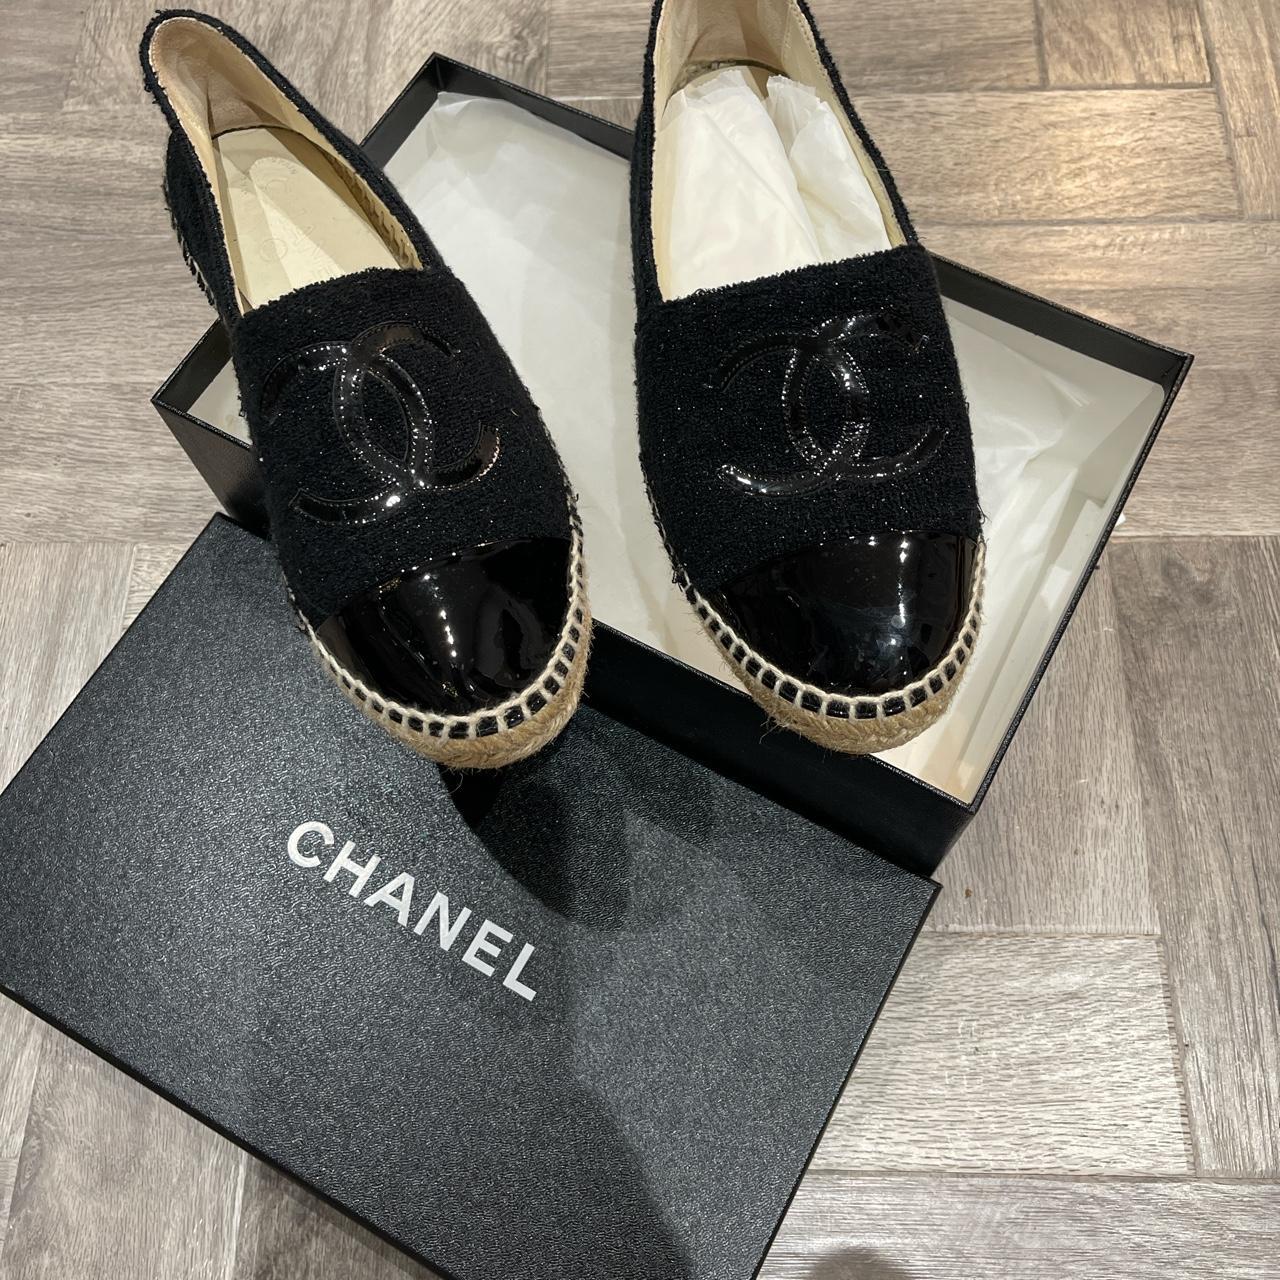 Chanel espadrilles Black with patent toe and CC on... - Depop